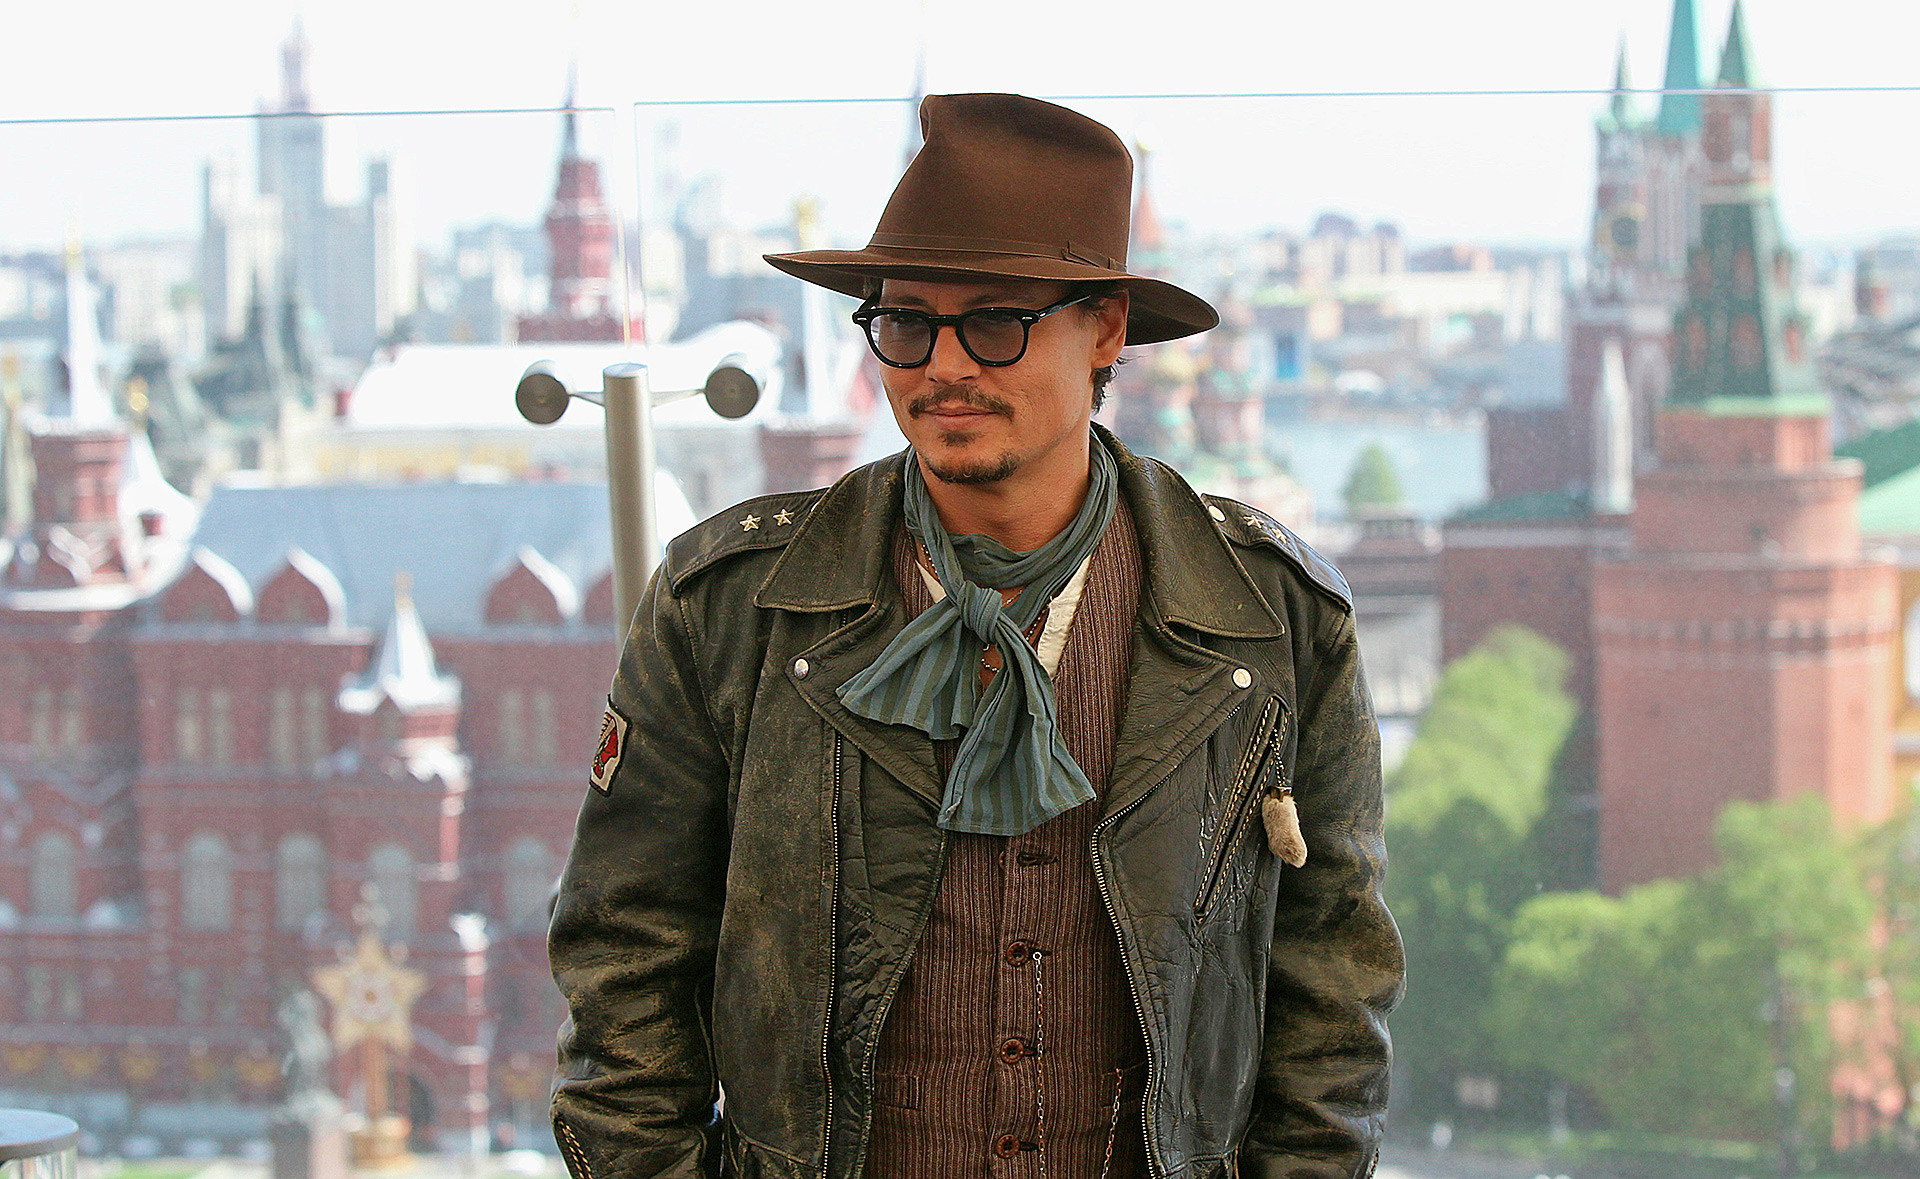 Earlier, Johnny Depp used to come to Moscow to promote his movies